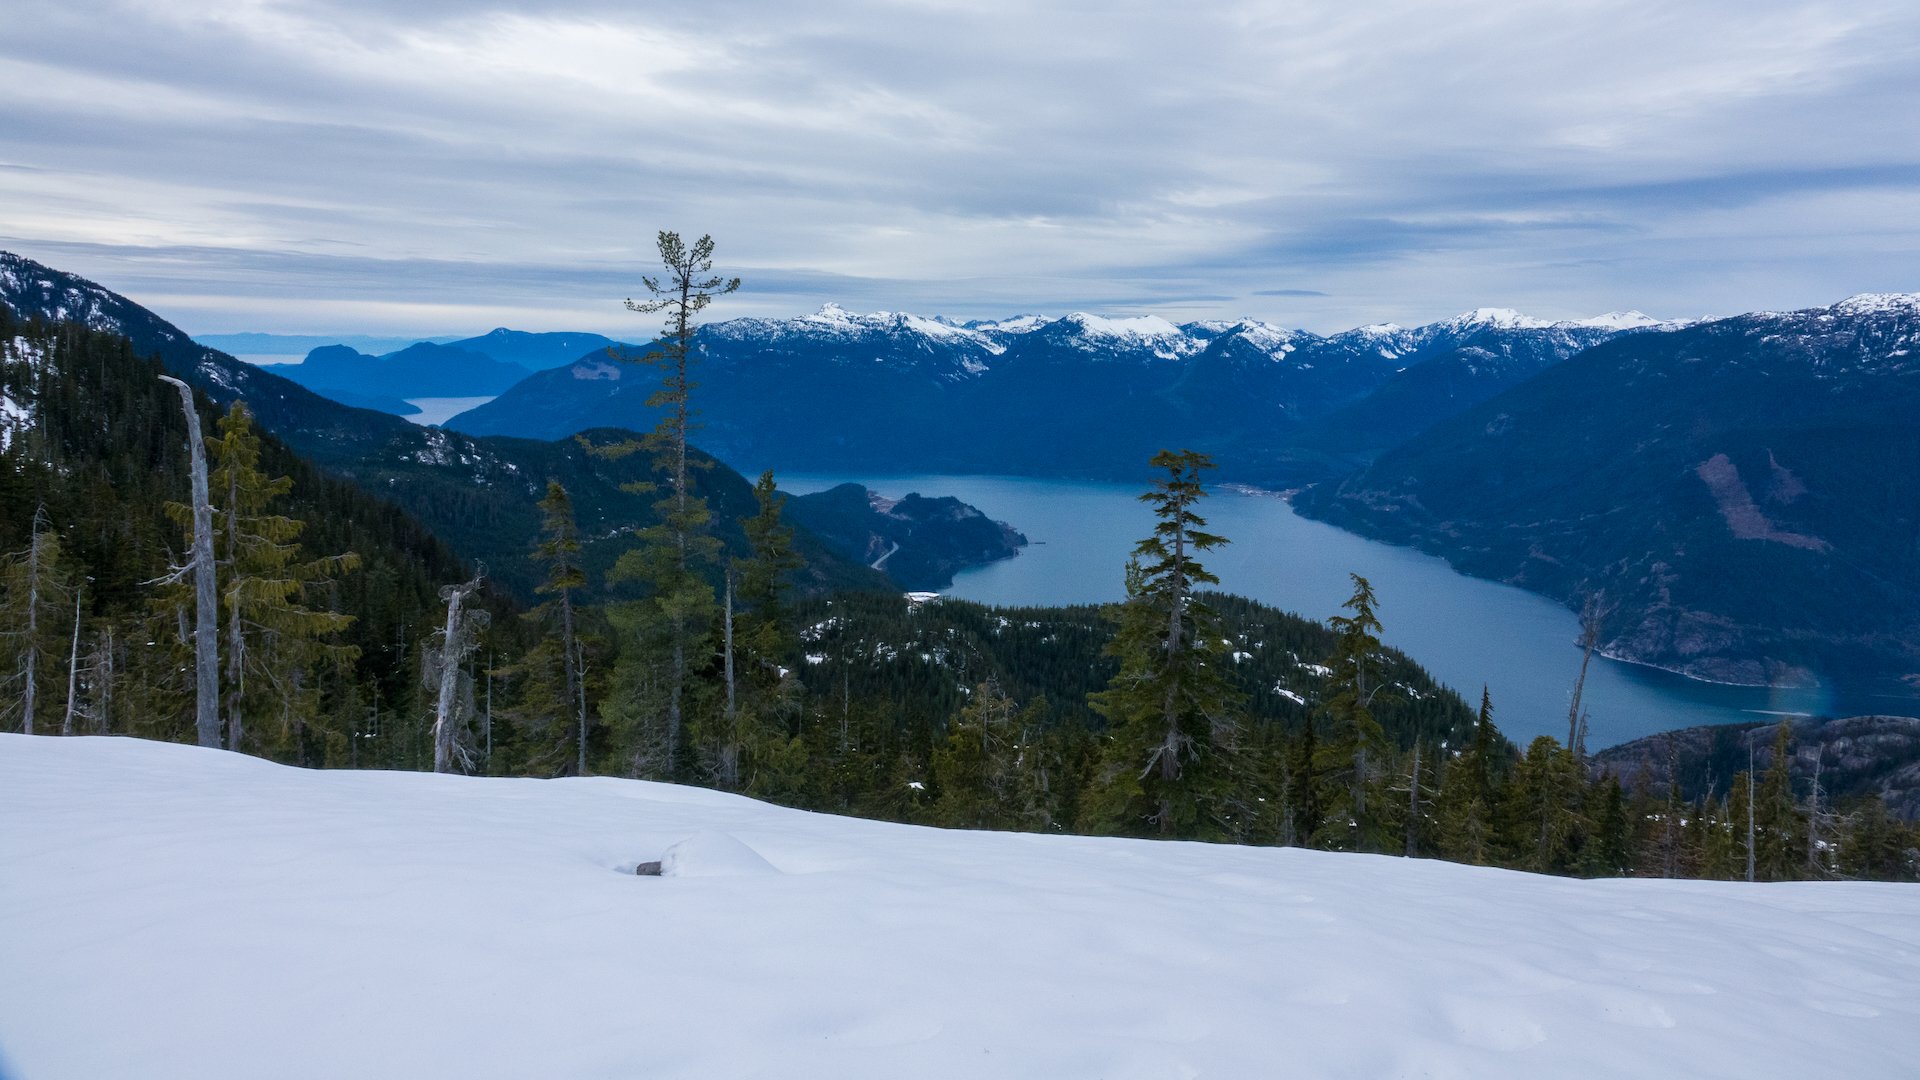  The view was back up and into Howe Sound.  